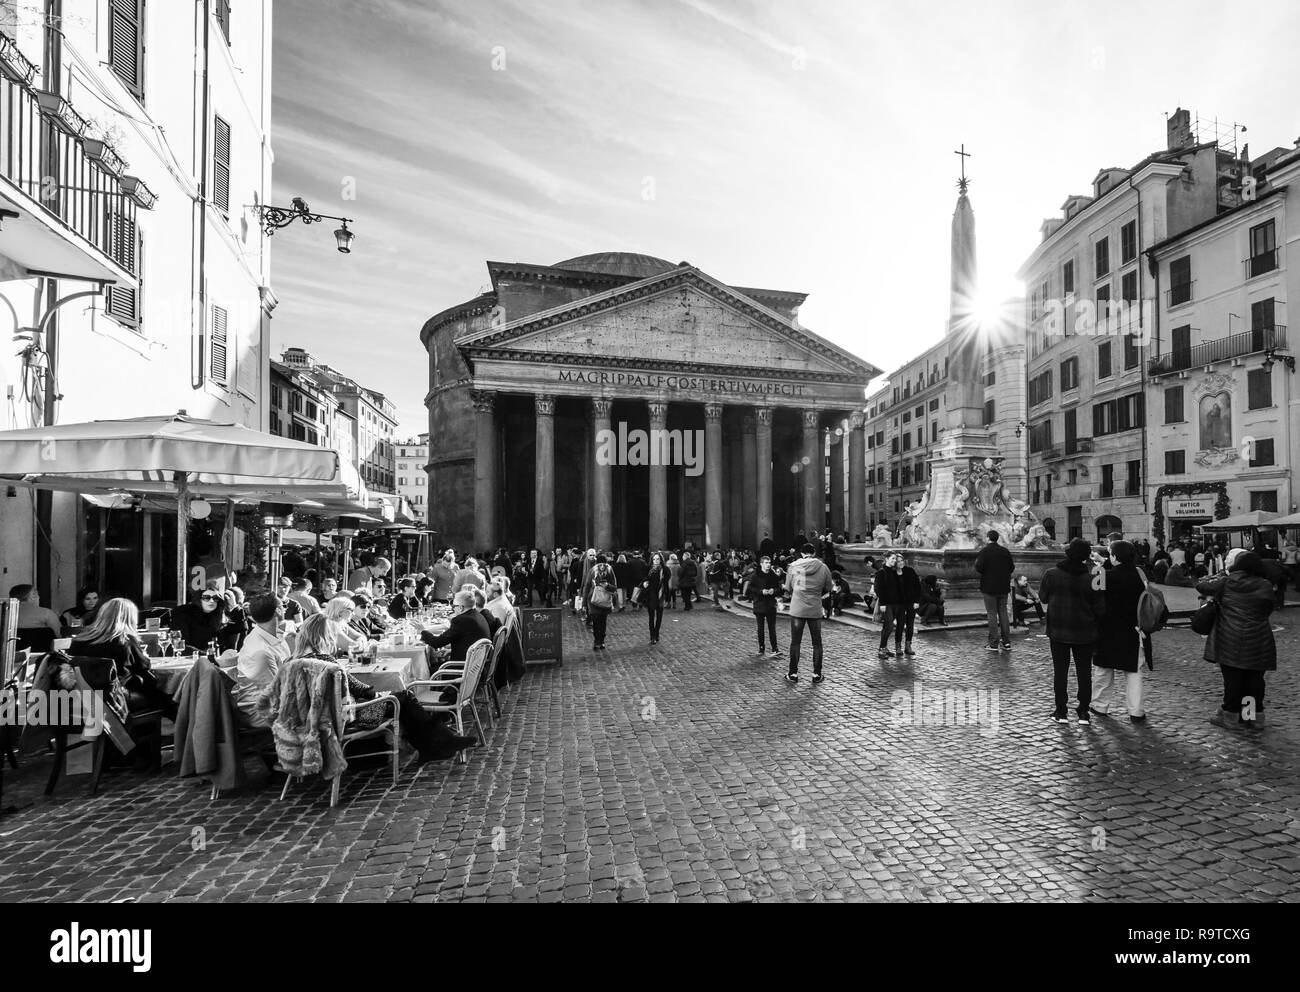 Rome (Italy) - Piazza Navona square, the Pantheon temple, Piazza Venezia with Vittoriano and Christmas tree named Spelacchio, during the Christmas Stock Photo